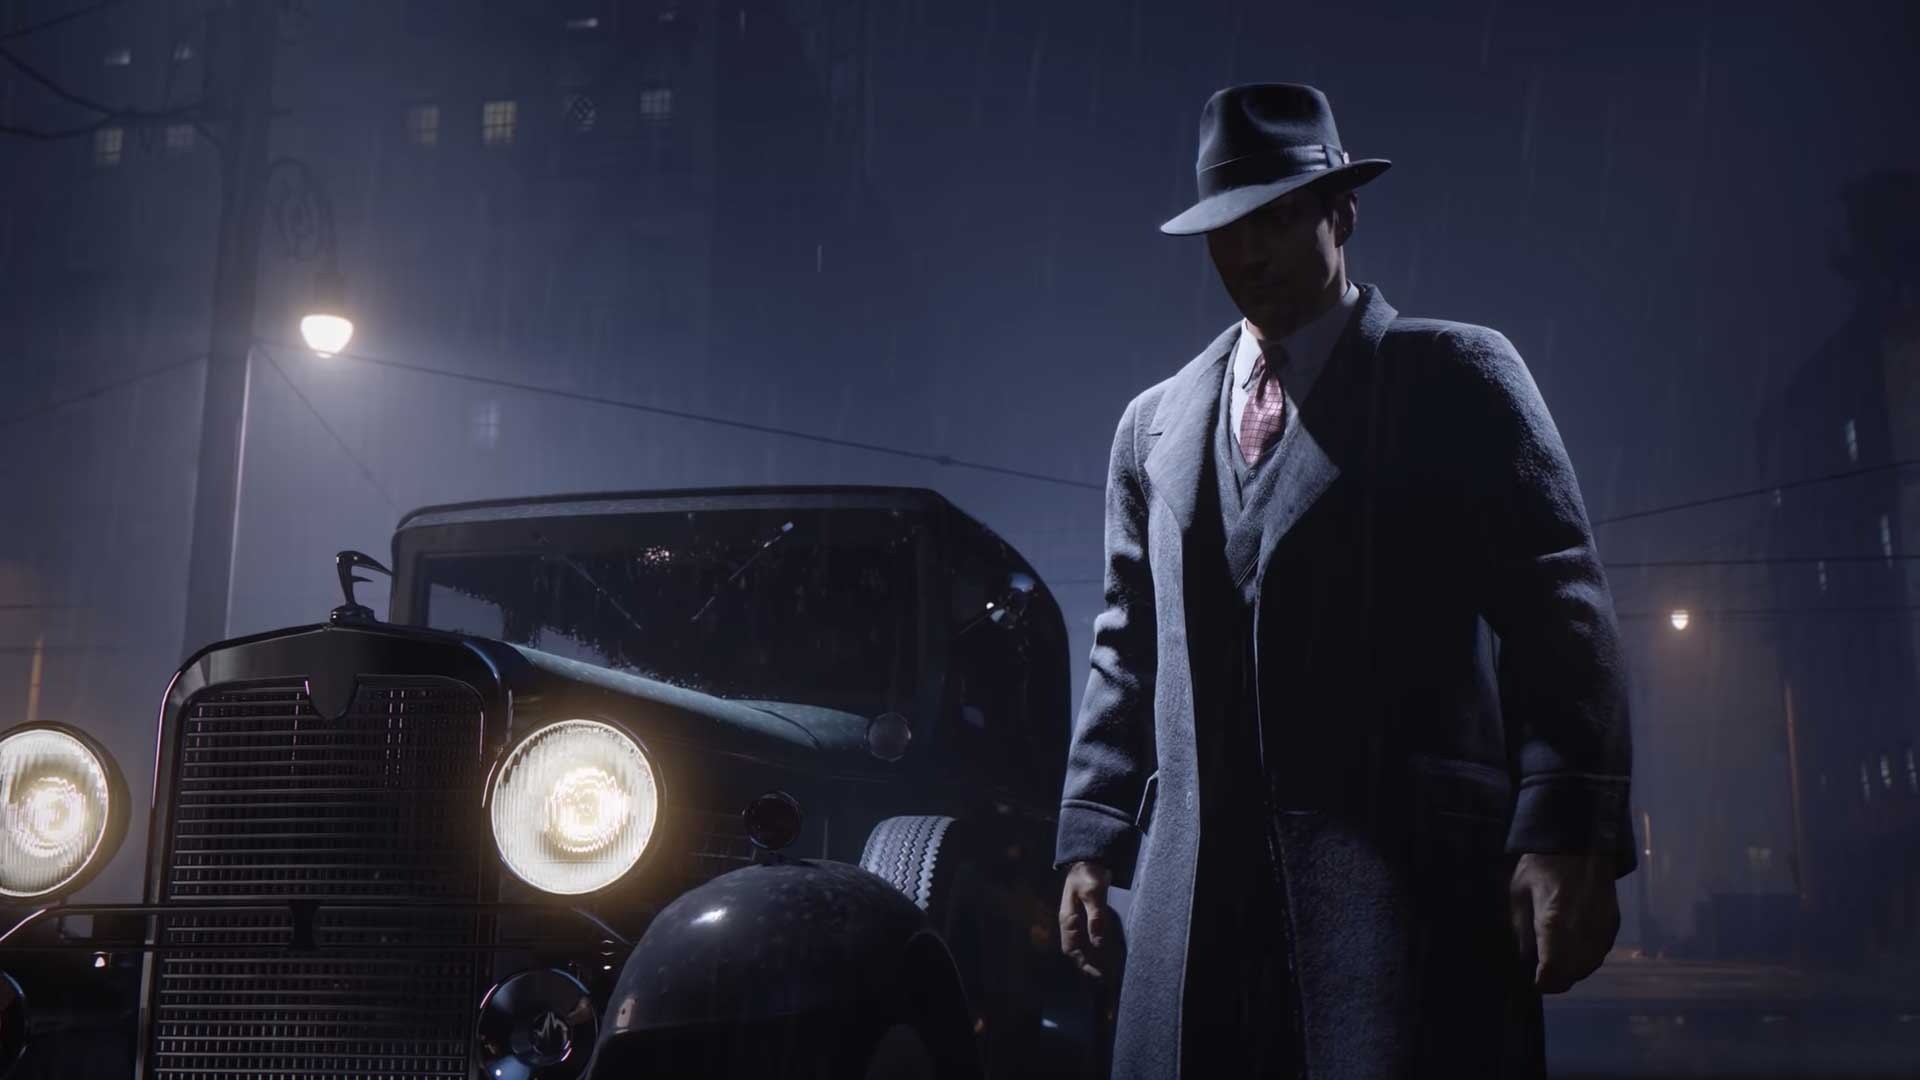 Rumors say that Take-Two is preparing to announce a new game in the Mafia series